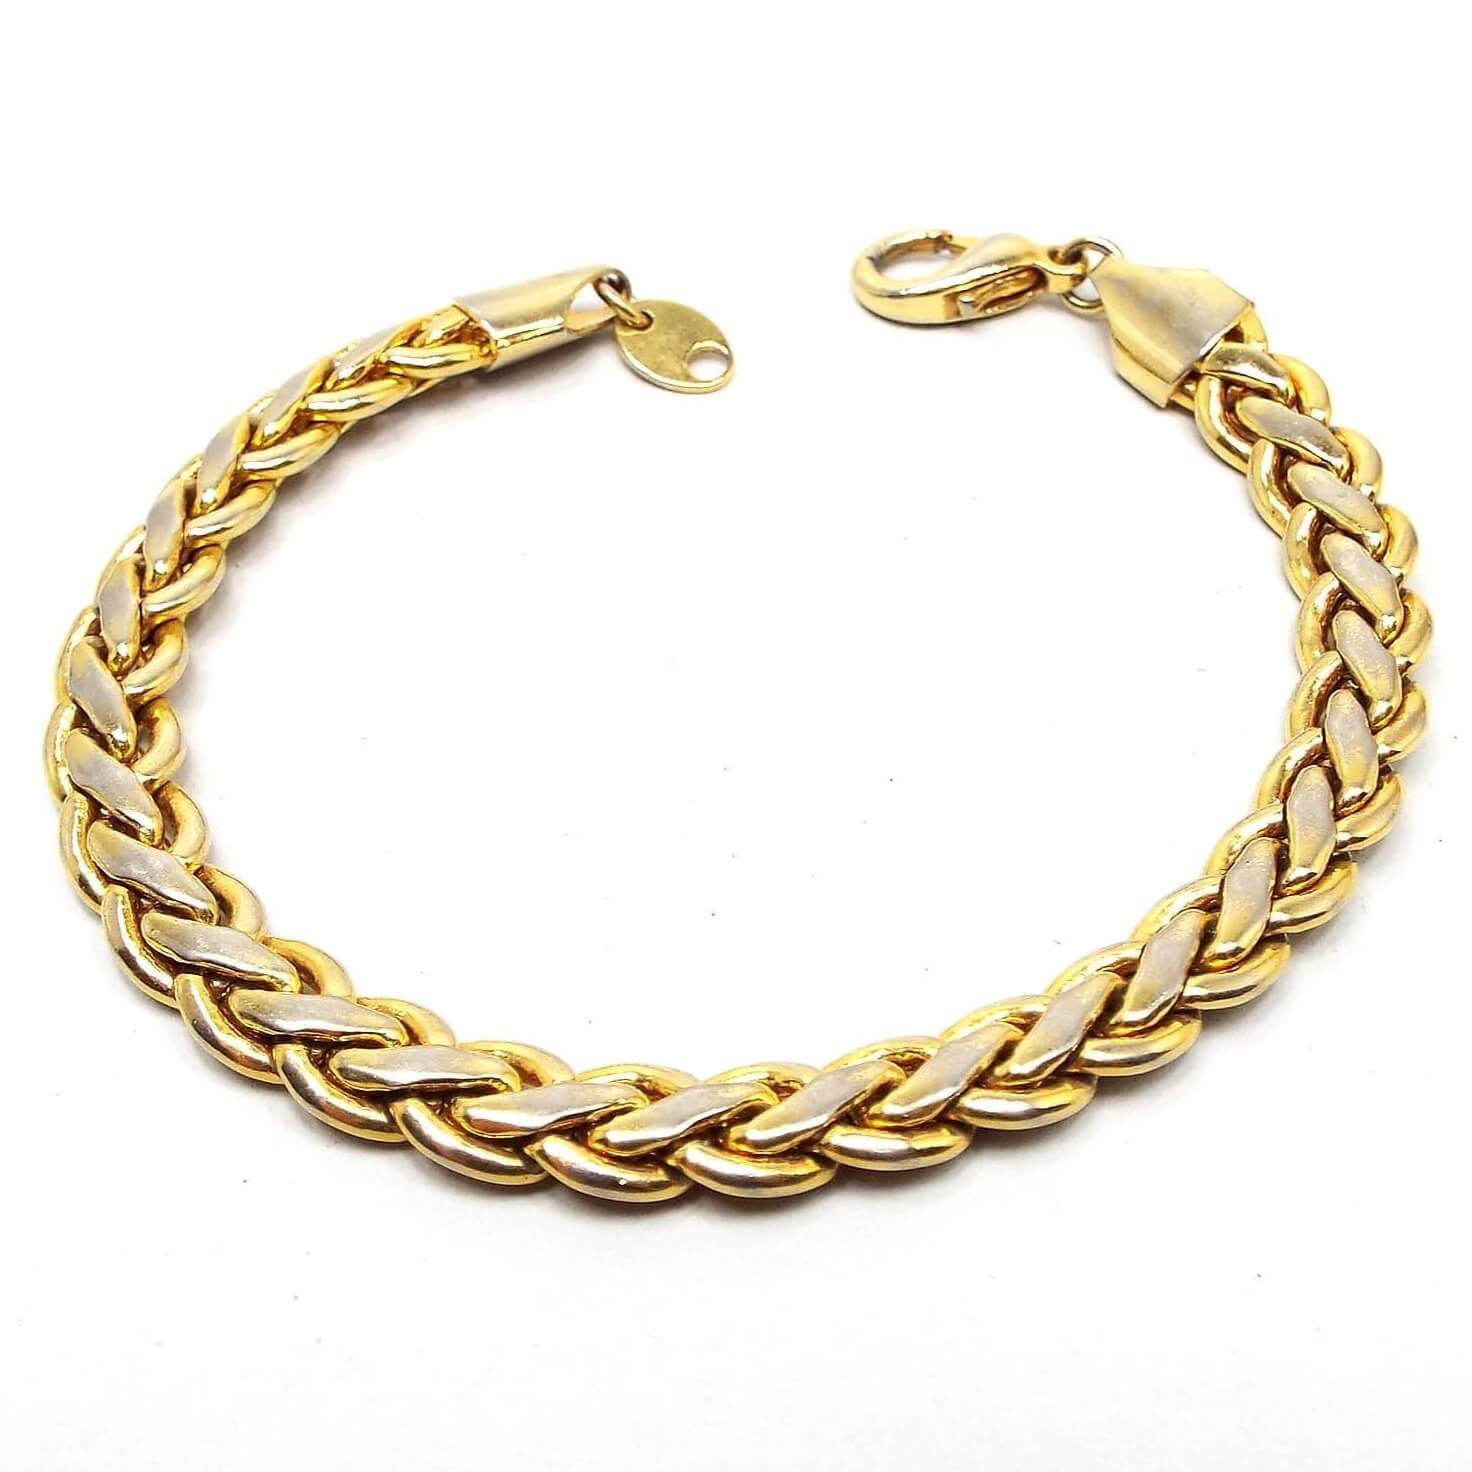 Top view of the retro vintage chain bracelet. It is gold tone in color with a lobster claw clasp. It has a braided woven design. There is some rub wear to the middle links where it is lighter in color when viewed closely.